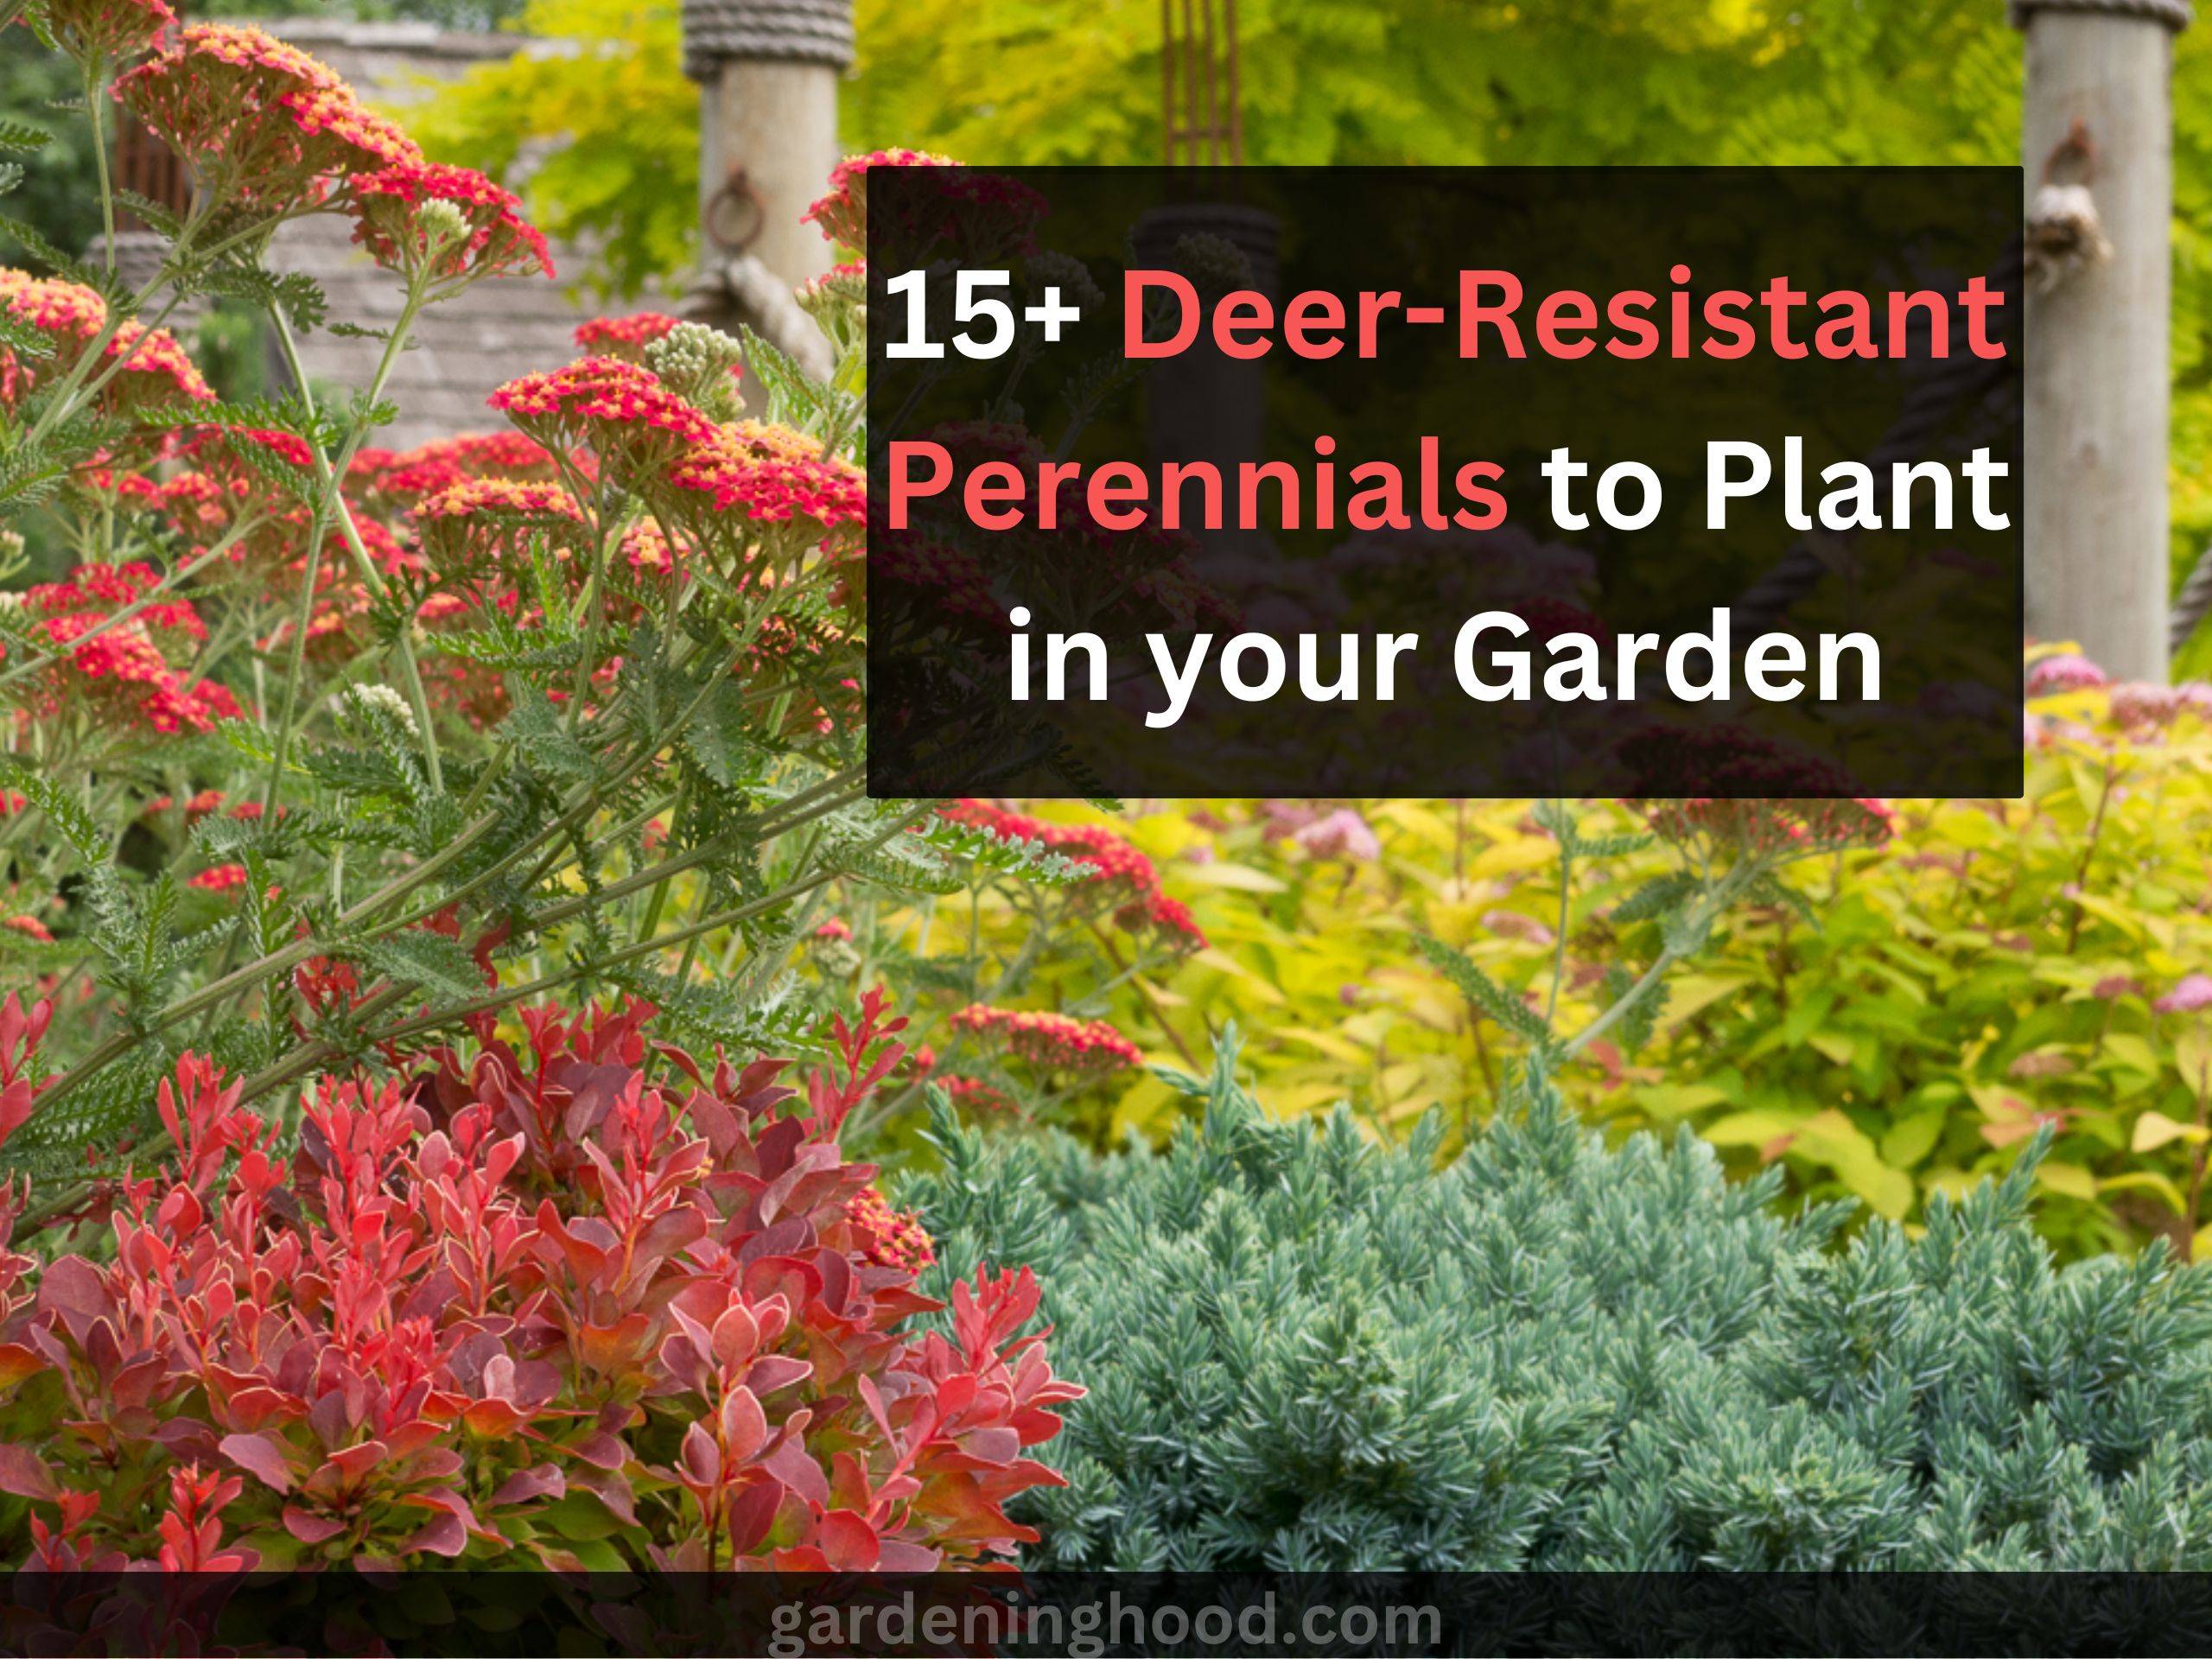 Deer-Resistant Perennials to Plant